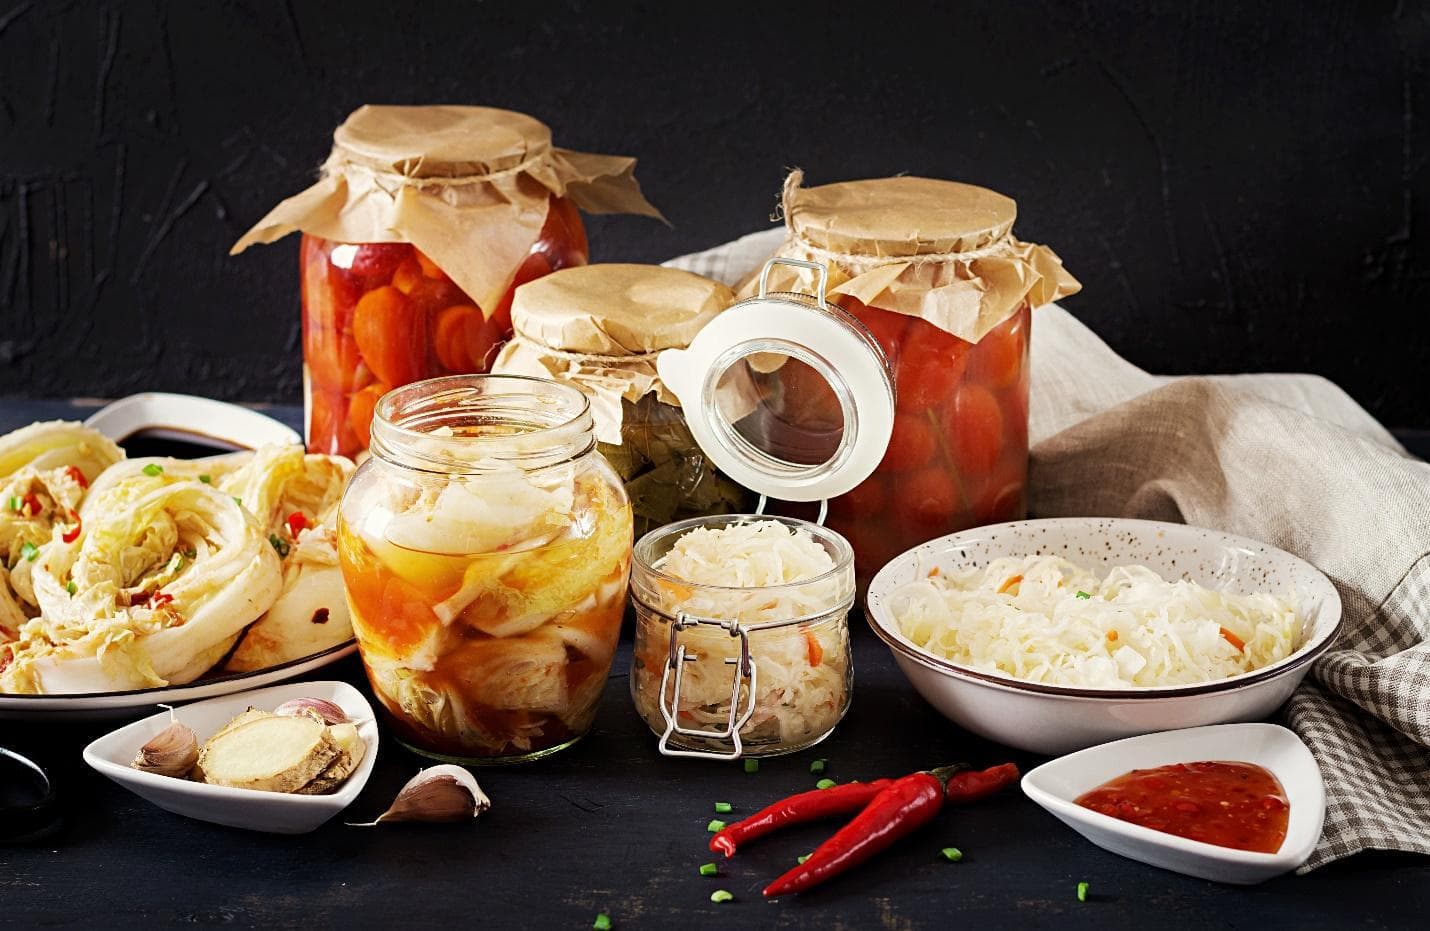 Best foods for Gut Health - Fermented Foods